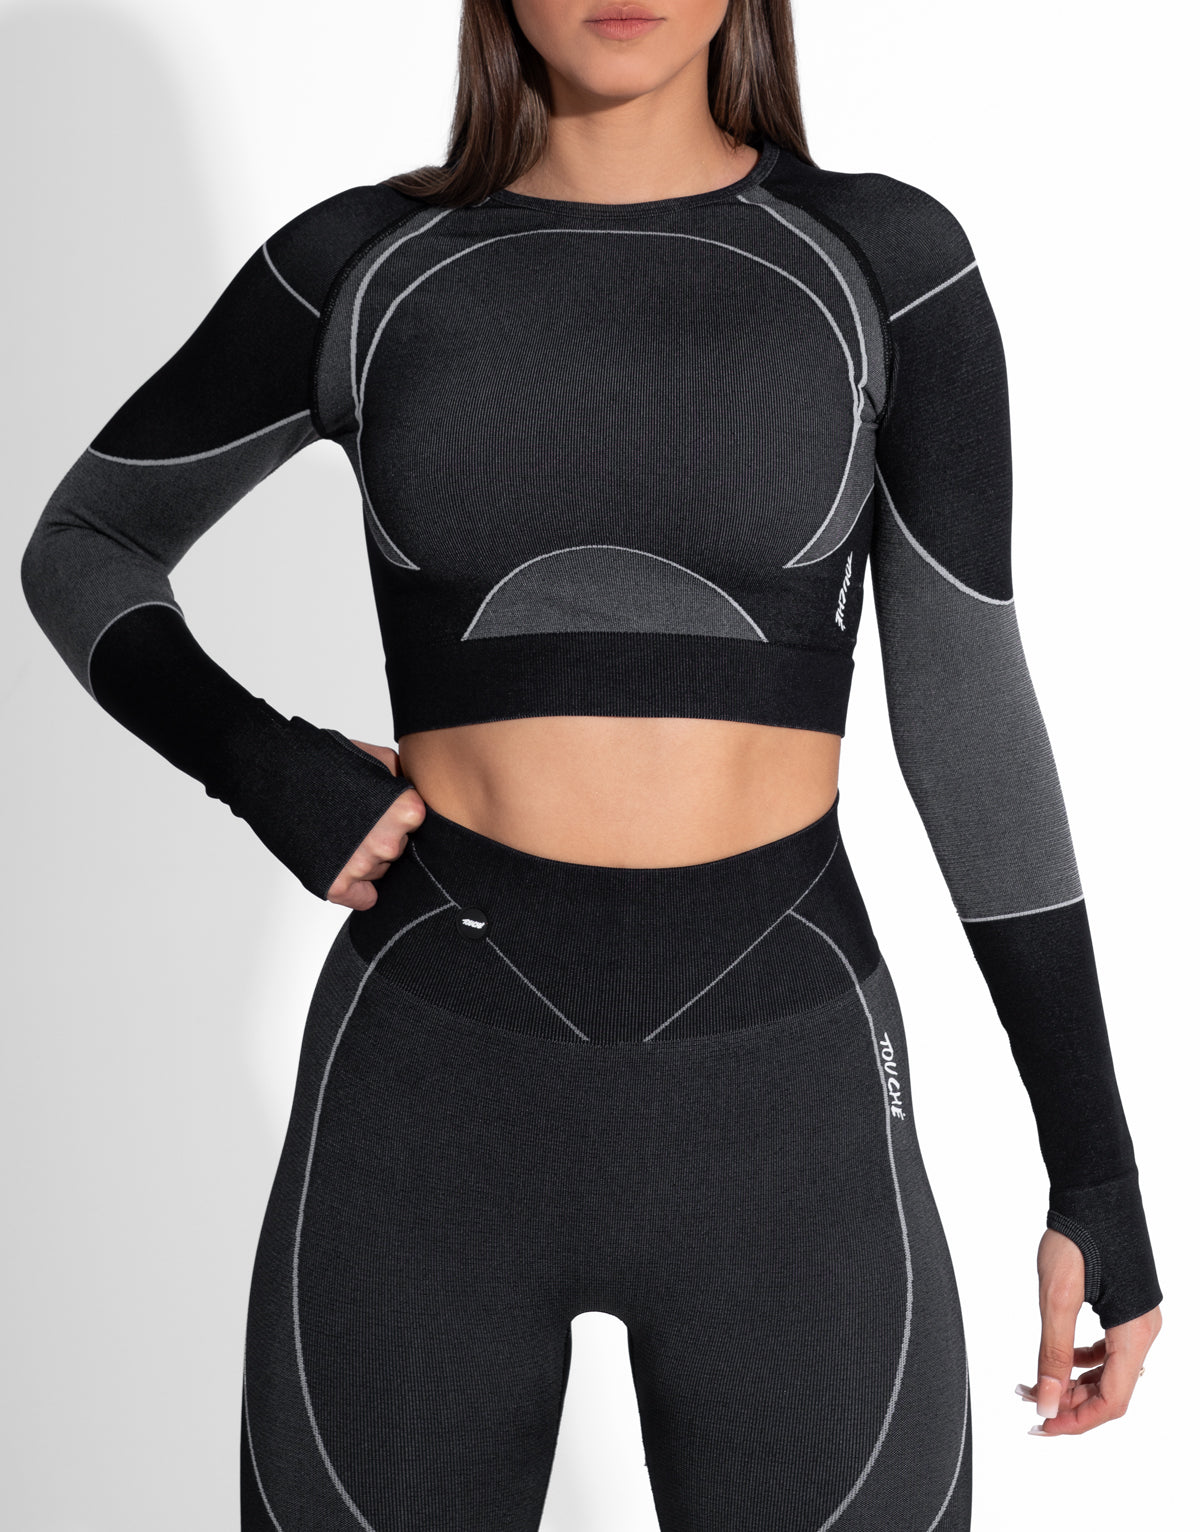 PACE LINES BLACK SEAMLESS TOP